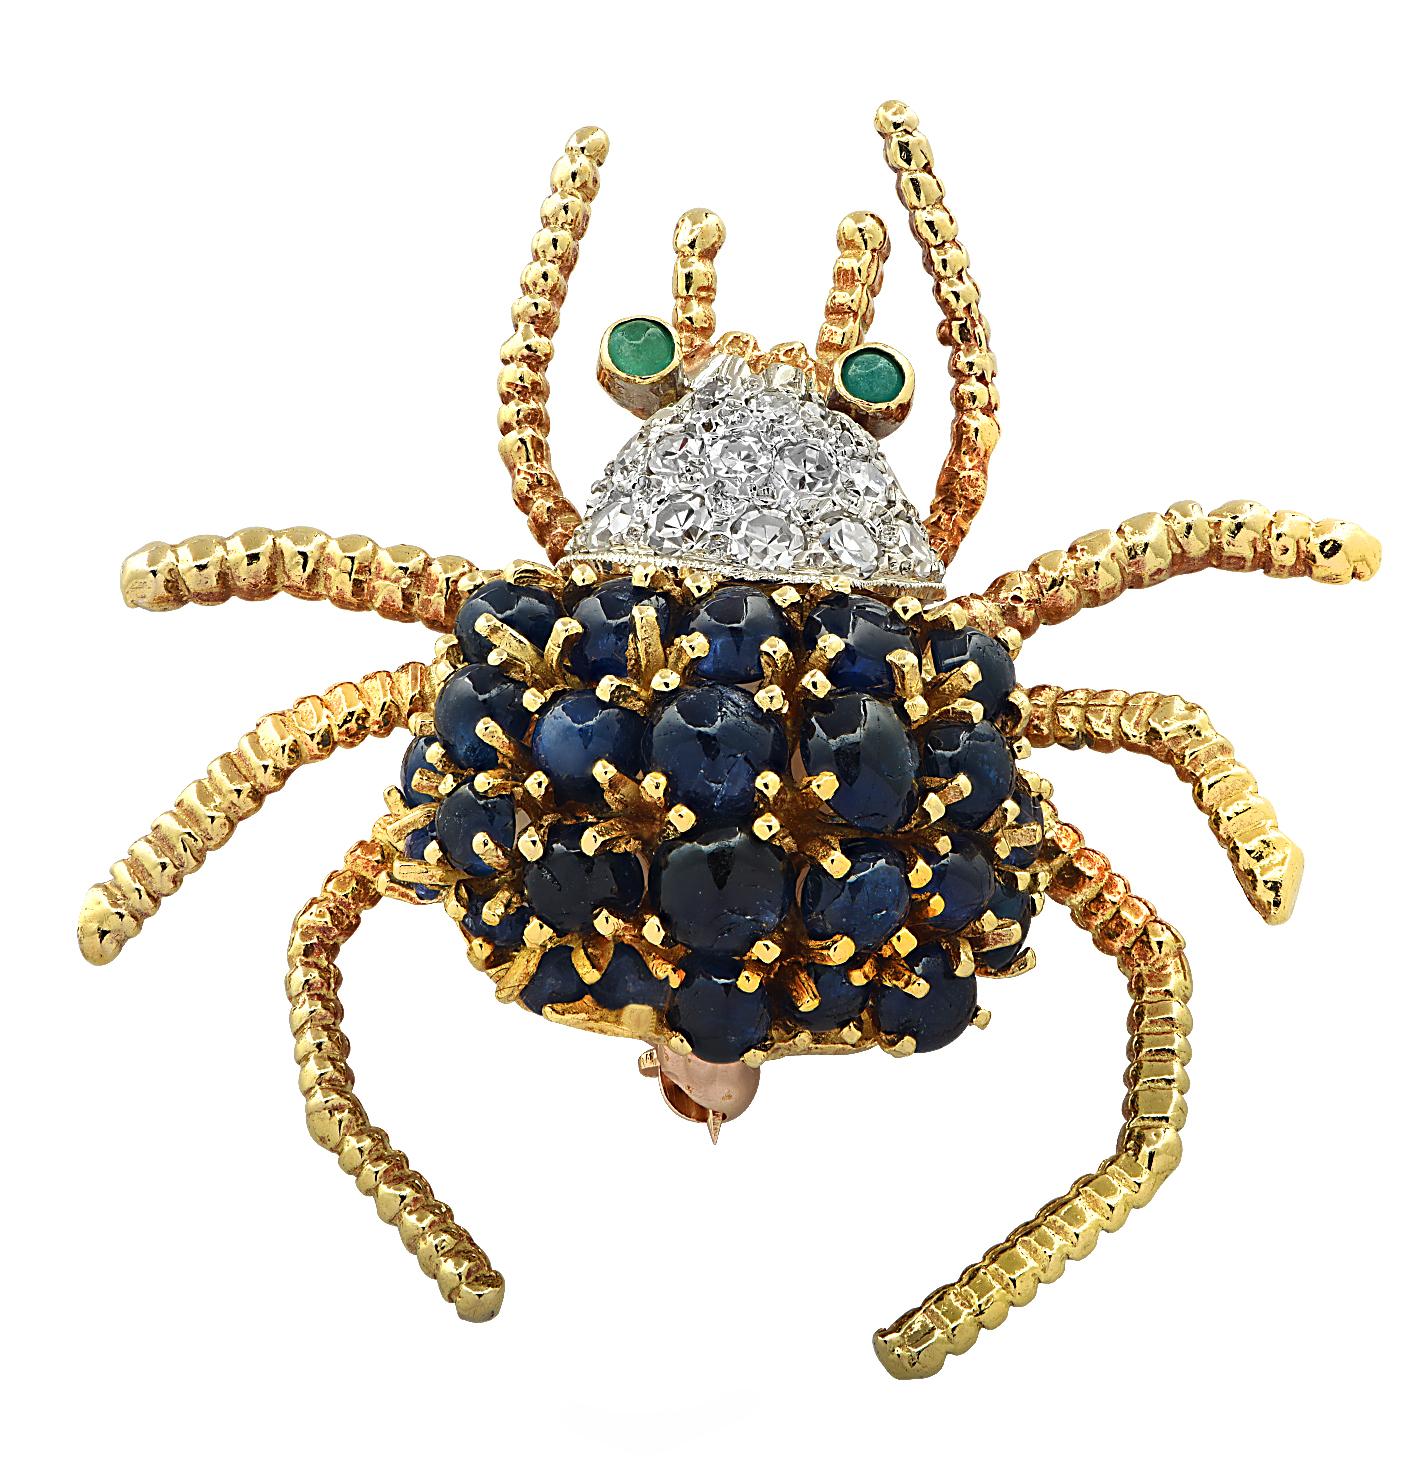 Enchanting spider brooch pin crafted in 18 karat yellow and white gold, adorned with 25 blue oval sapphire cabochons weighing approximately 2.50 carats total, 16 single cut diamonds weighing approximately .20 carats total, G color, VS clarity and 2